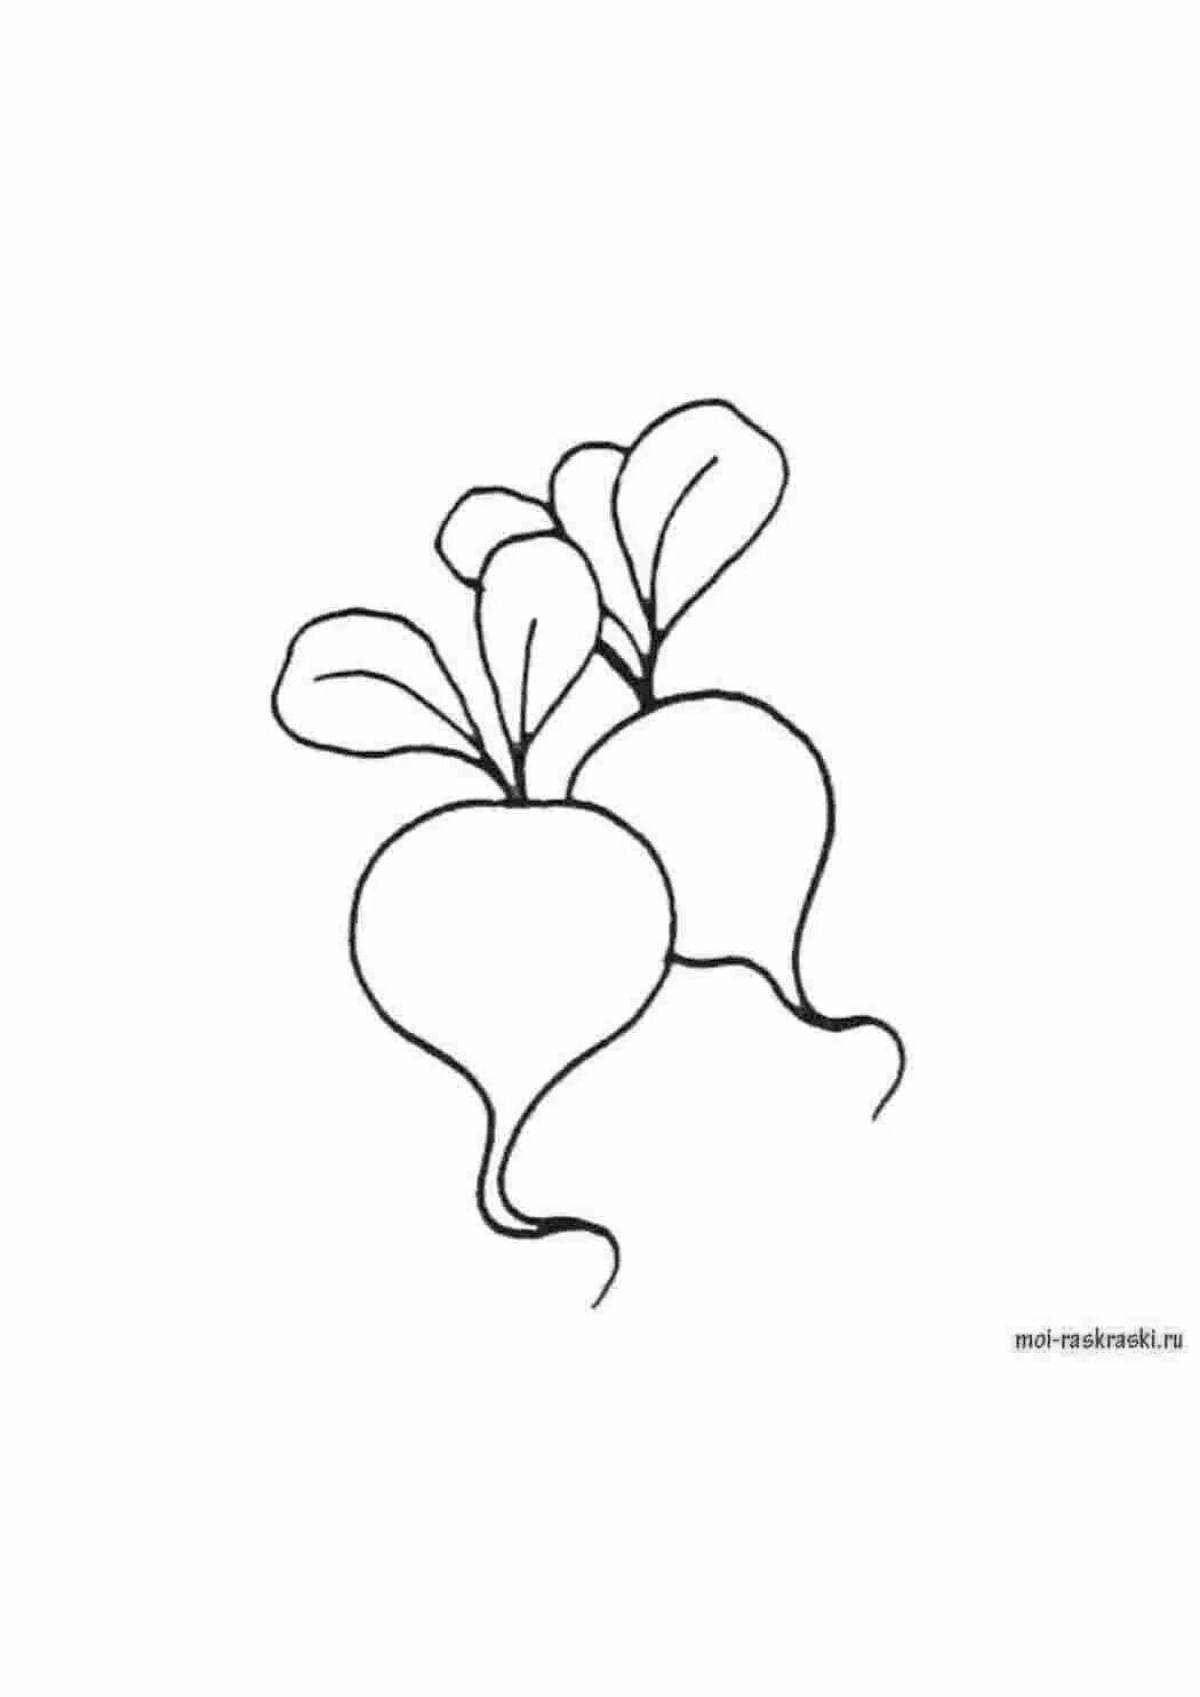 Exciting radish coloring page